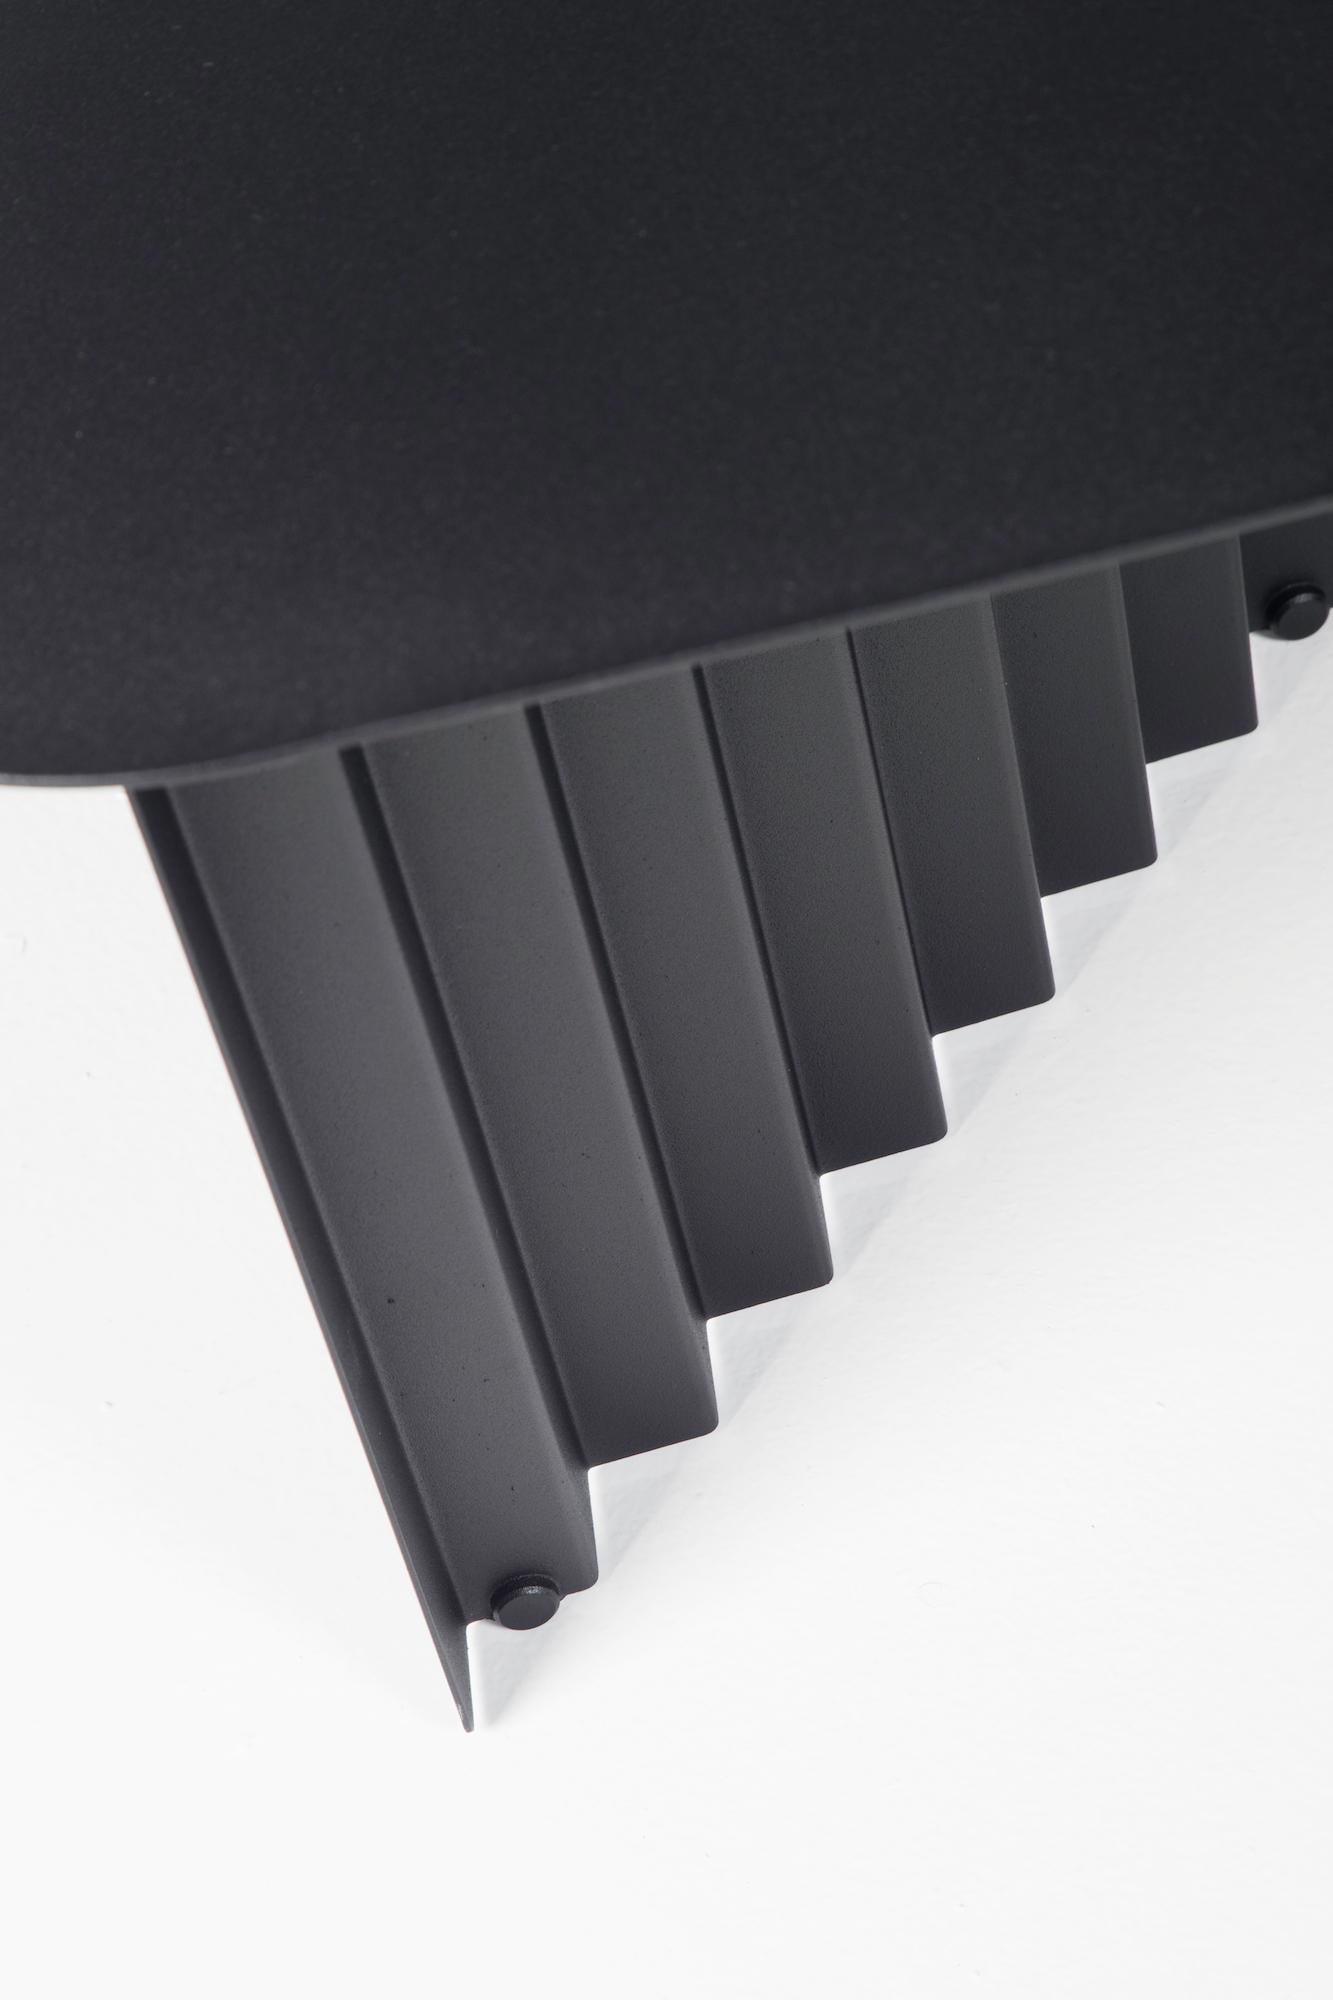 Modern RS Barcelona Plec Medium Table in Black Metal by A.P.O. For Sale